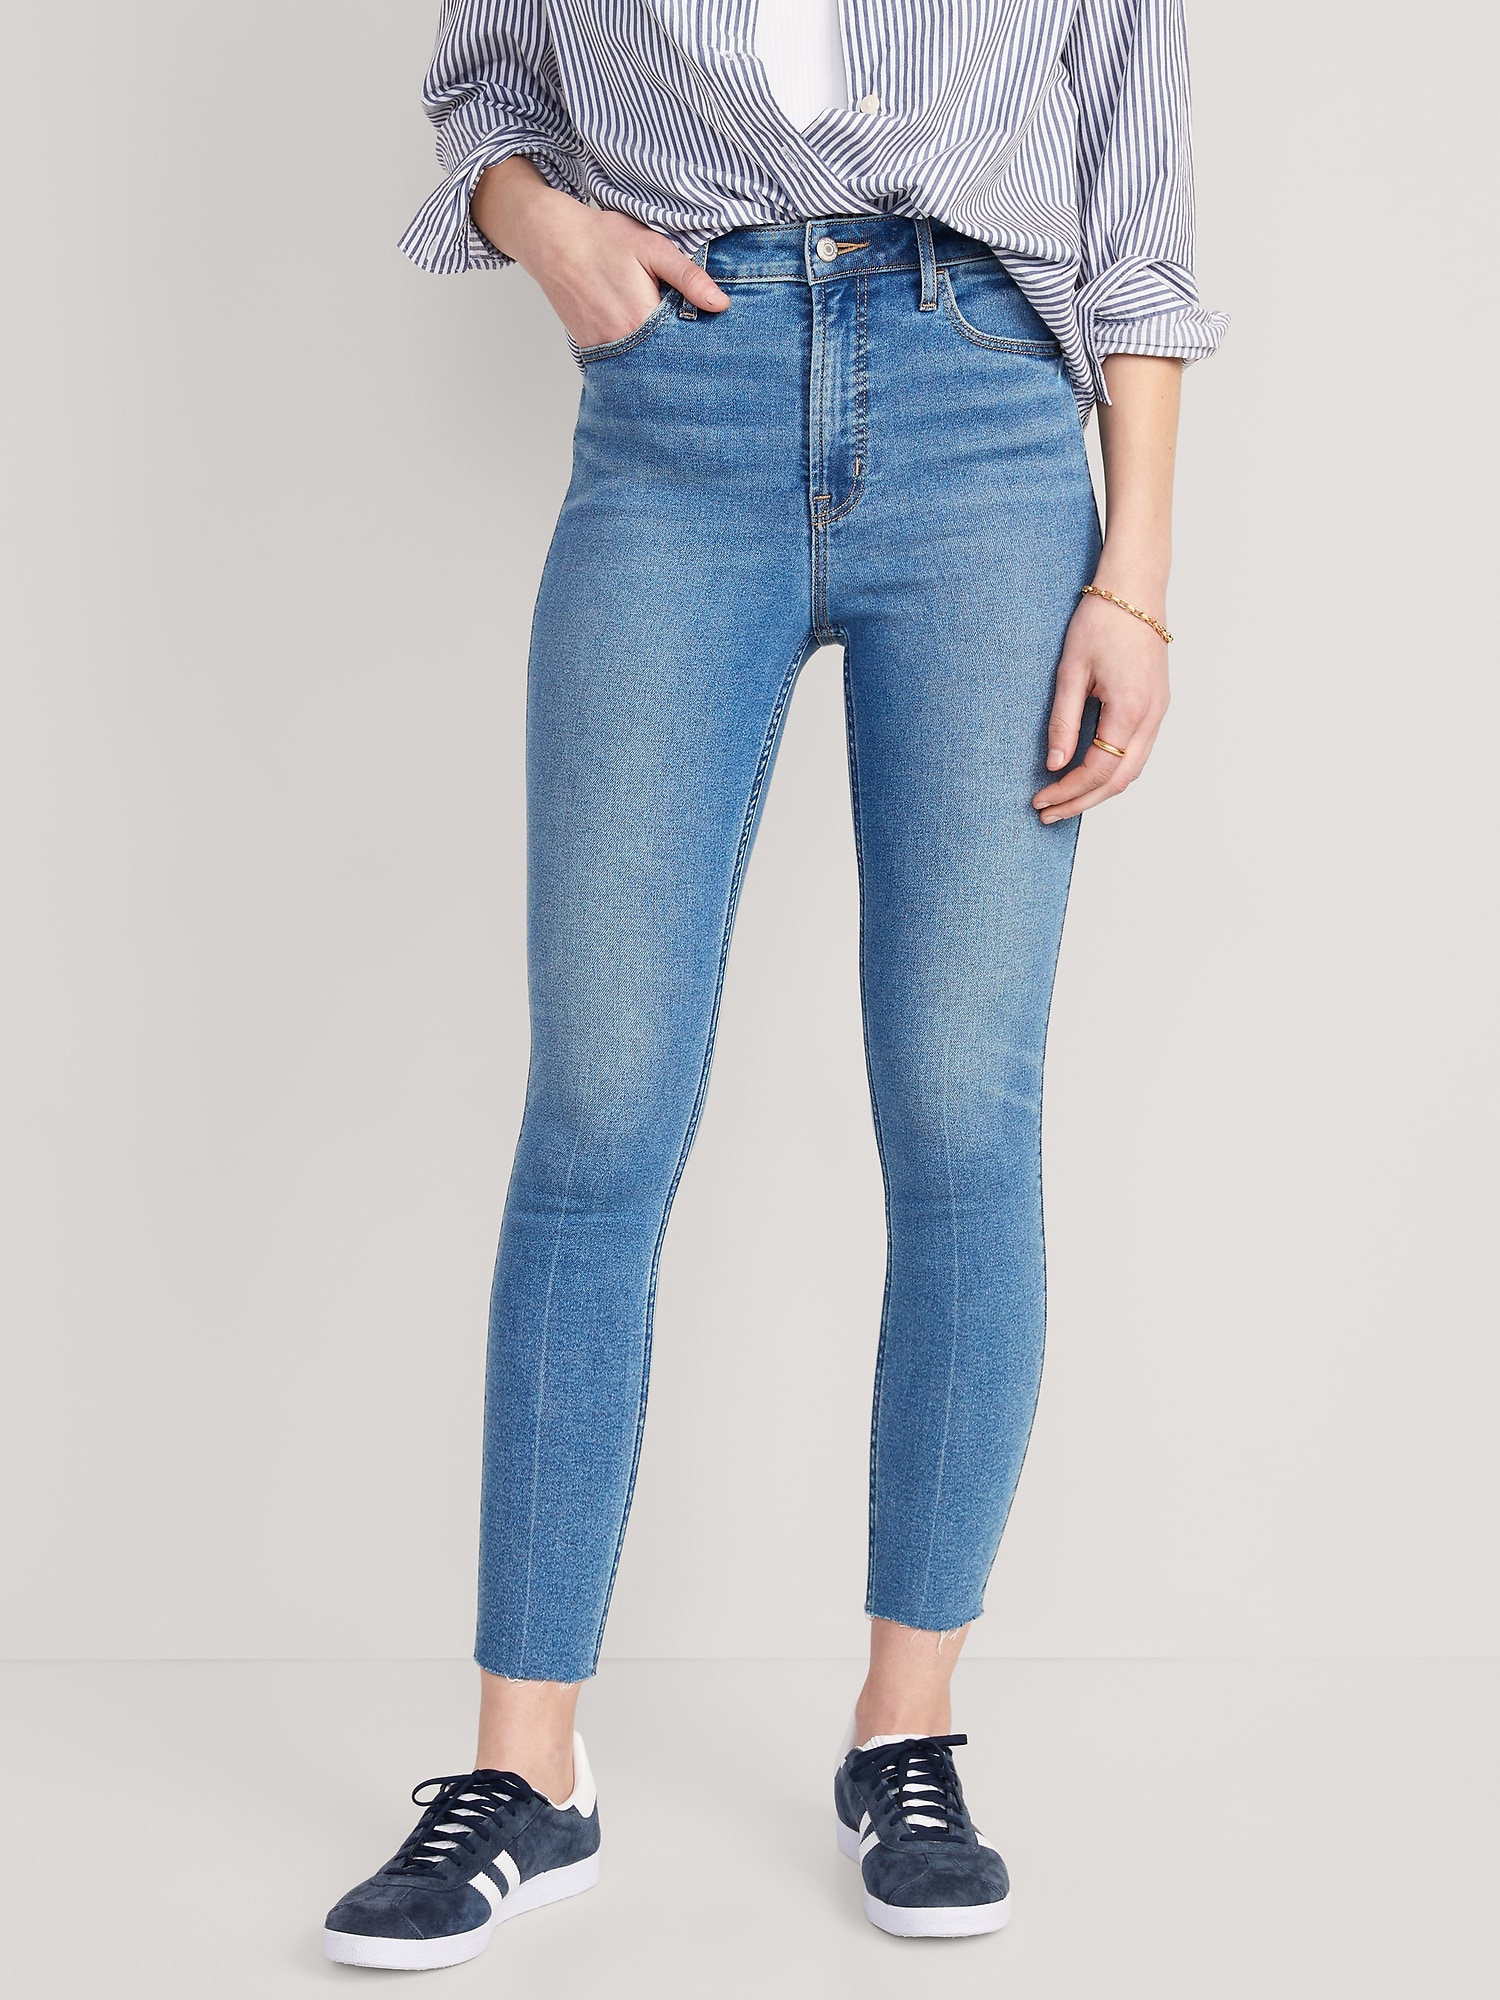 Extra High-Waisted Rockstar 360° Stretch Super-Skinny Jeans | Old Navy